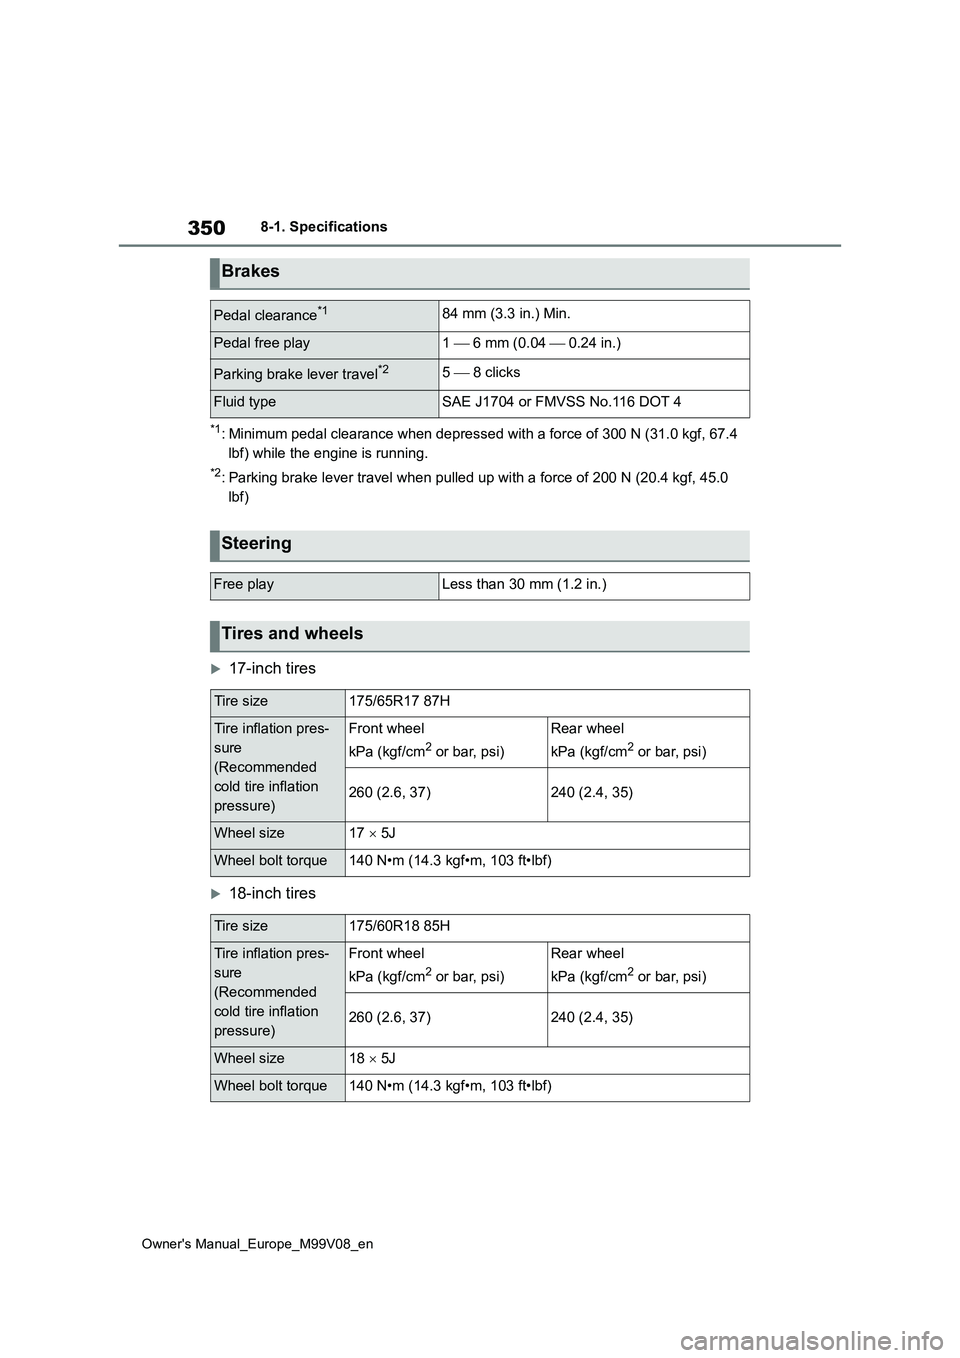 TOYOTA AYGO X 2022  Owners Manual (in English) 350
Owner's Manual_Europe_M99V08_en
8-1. Specifications
*1: Minimum pedal clearance when depressed with a force of 300 N (31.0 kgf, 67.4  
lbf) while the engine is running.
*2: Parking brake lever